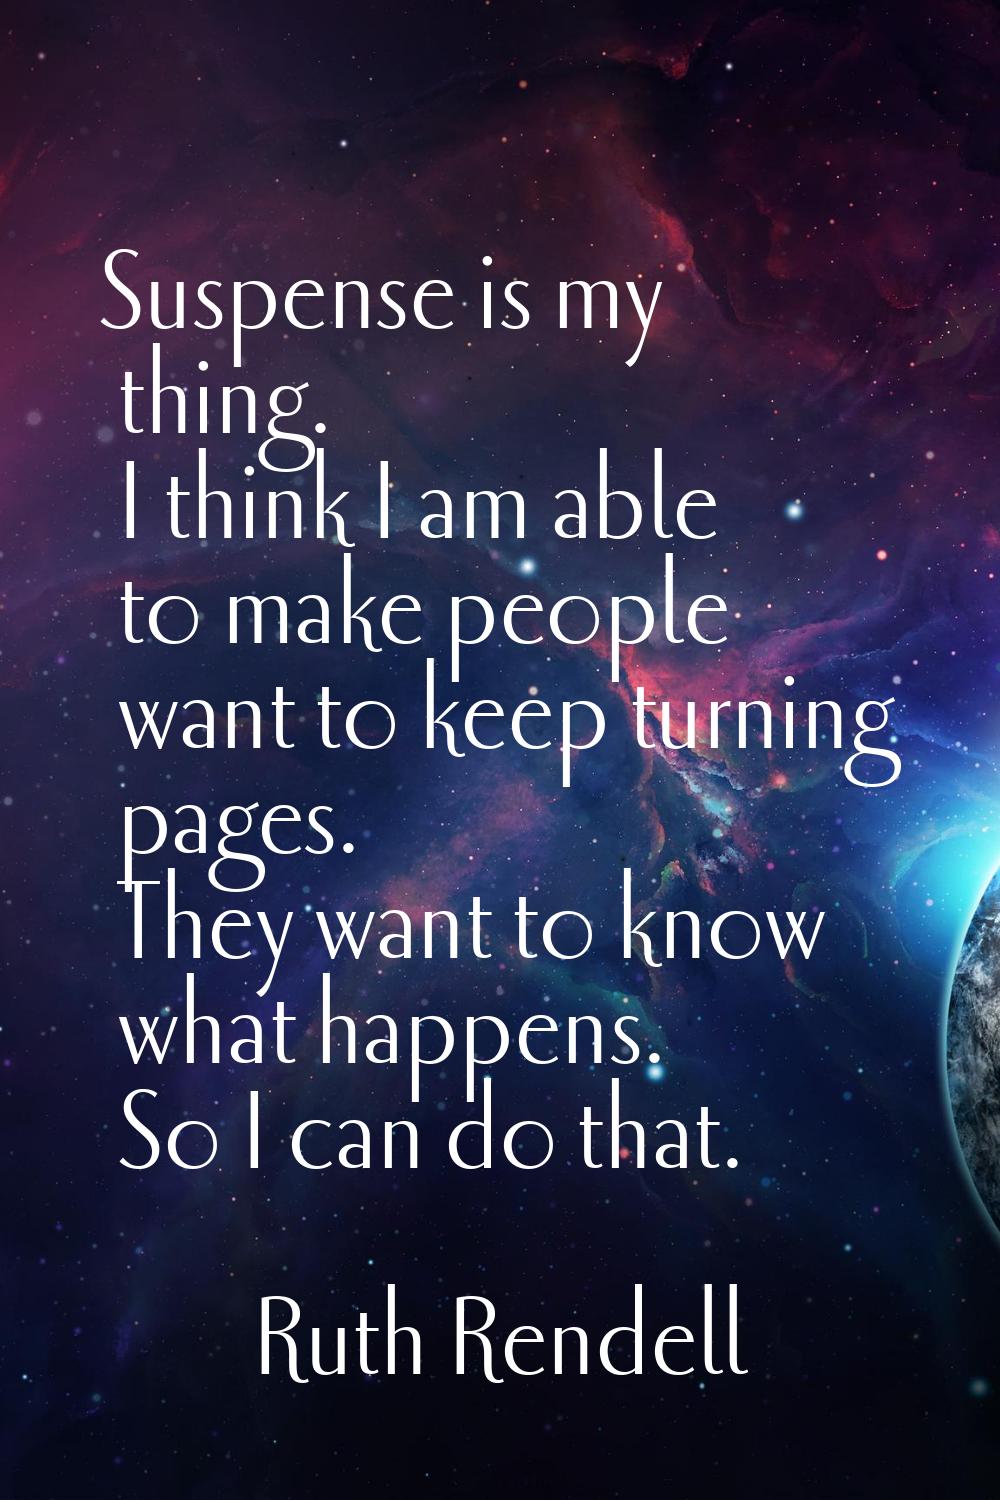 Suspense is my thing. I think I am able to make people want to keep turning pages. They want to kno